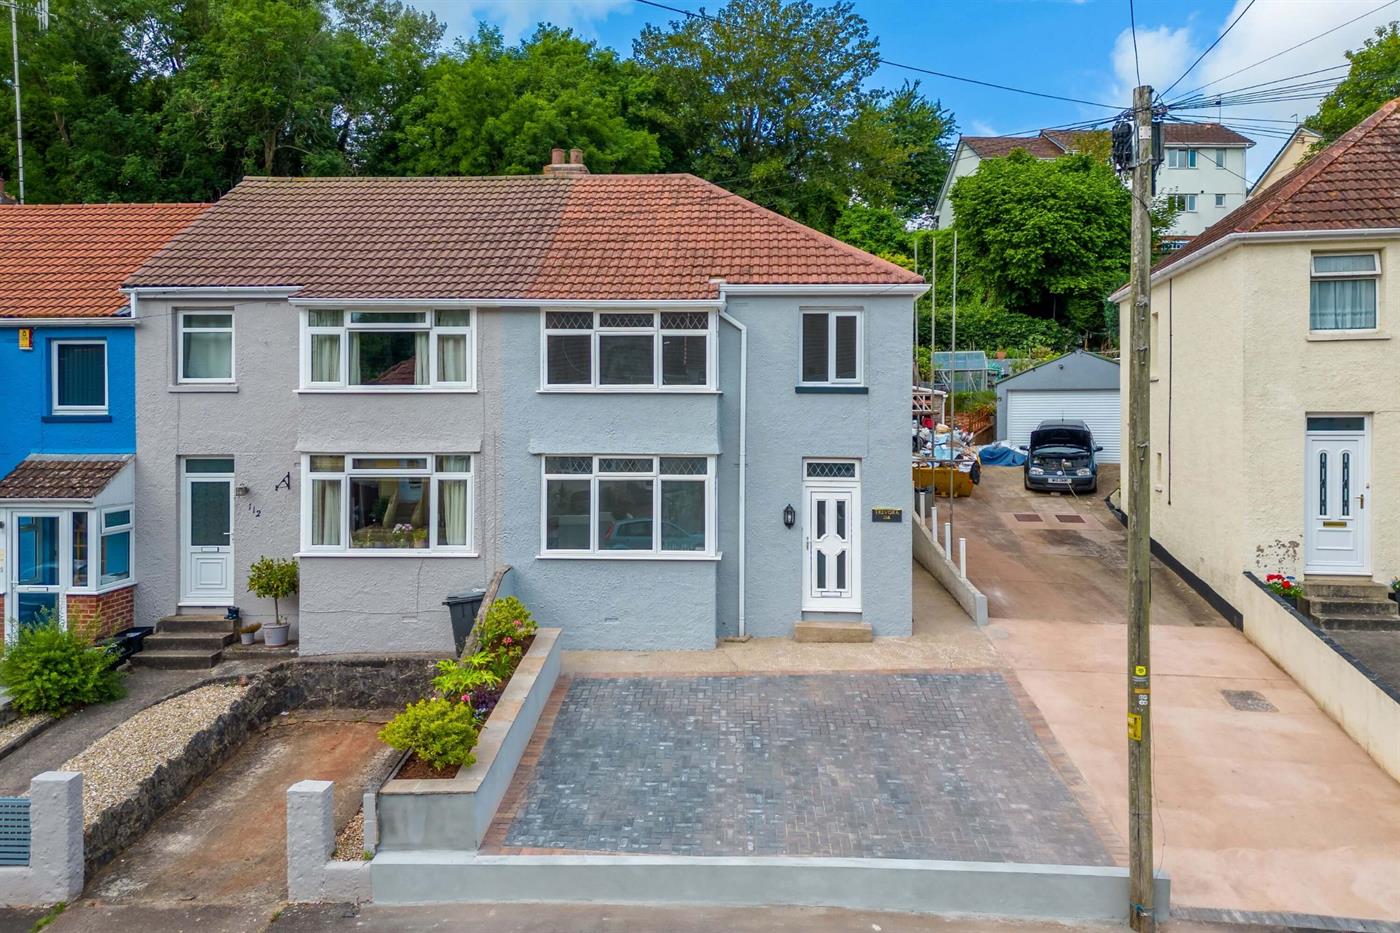 3 Bedroom End of Terrace House for Sale: Sherwell Valley Road, Chelston, Torquay, TQ2 6EX